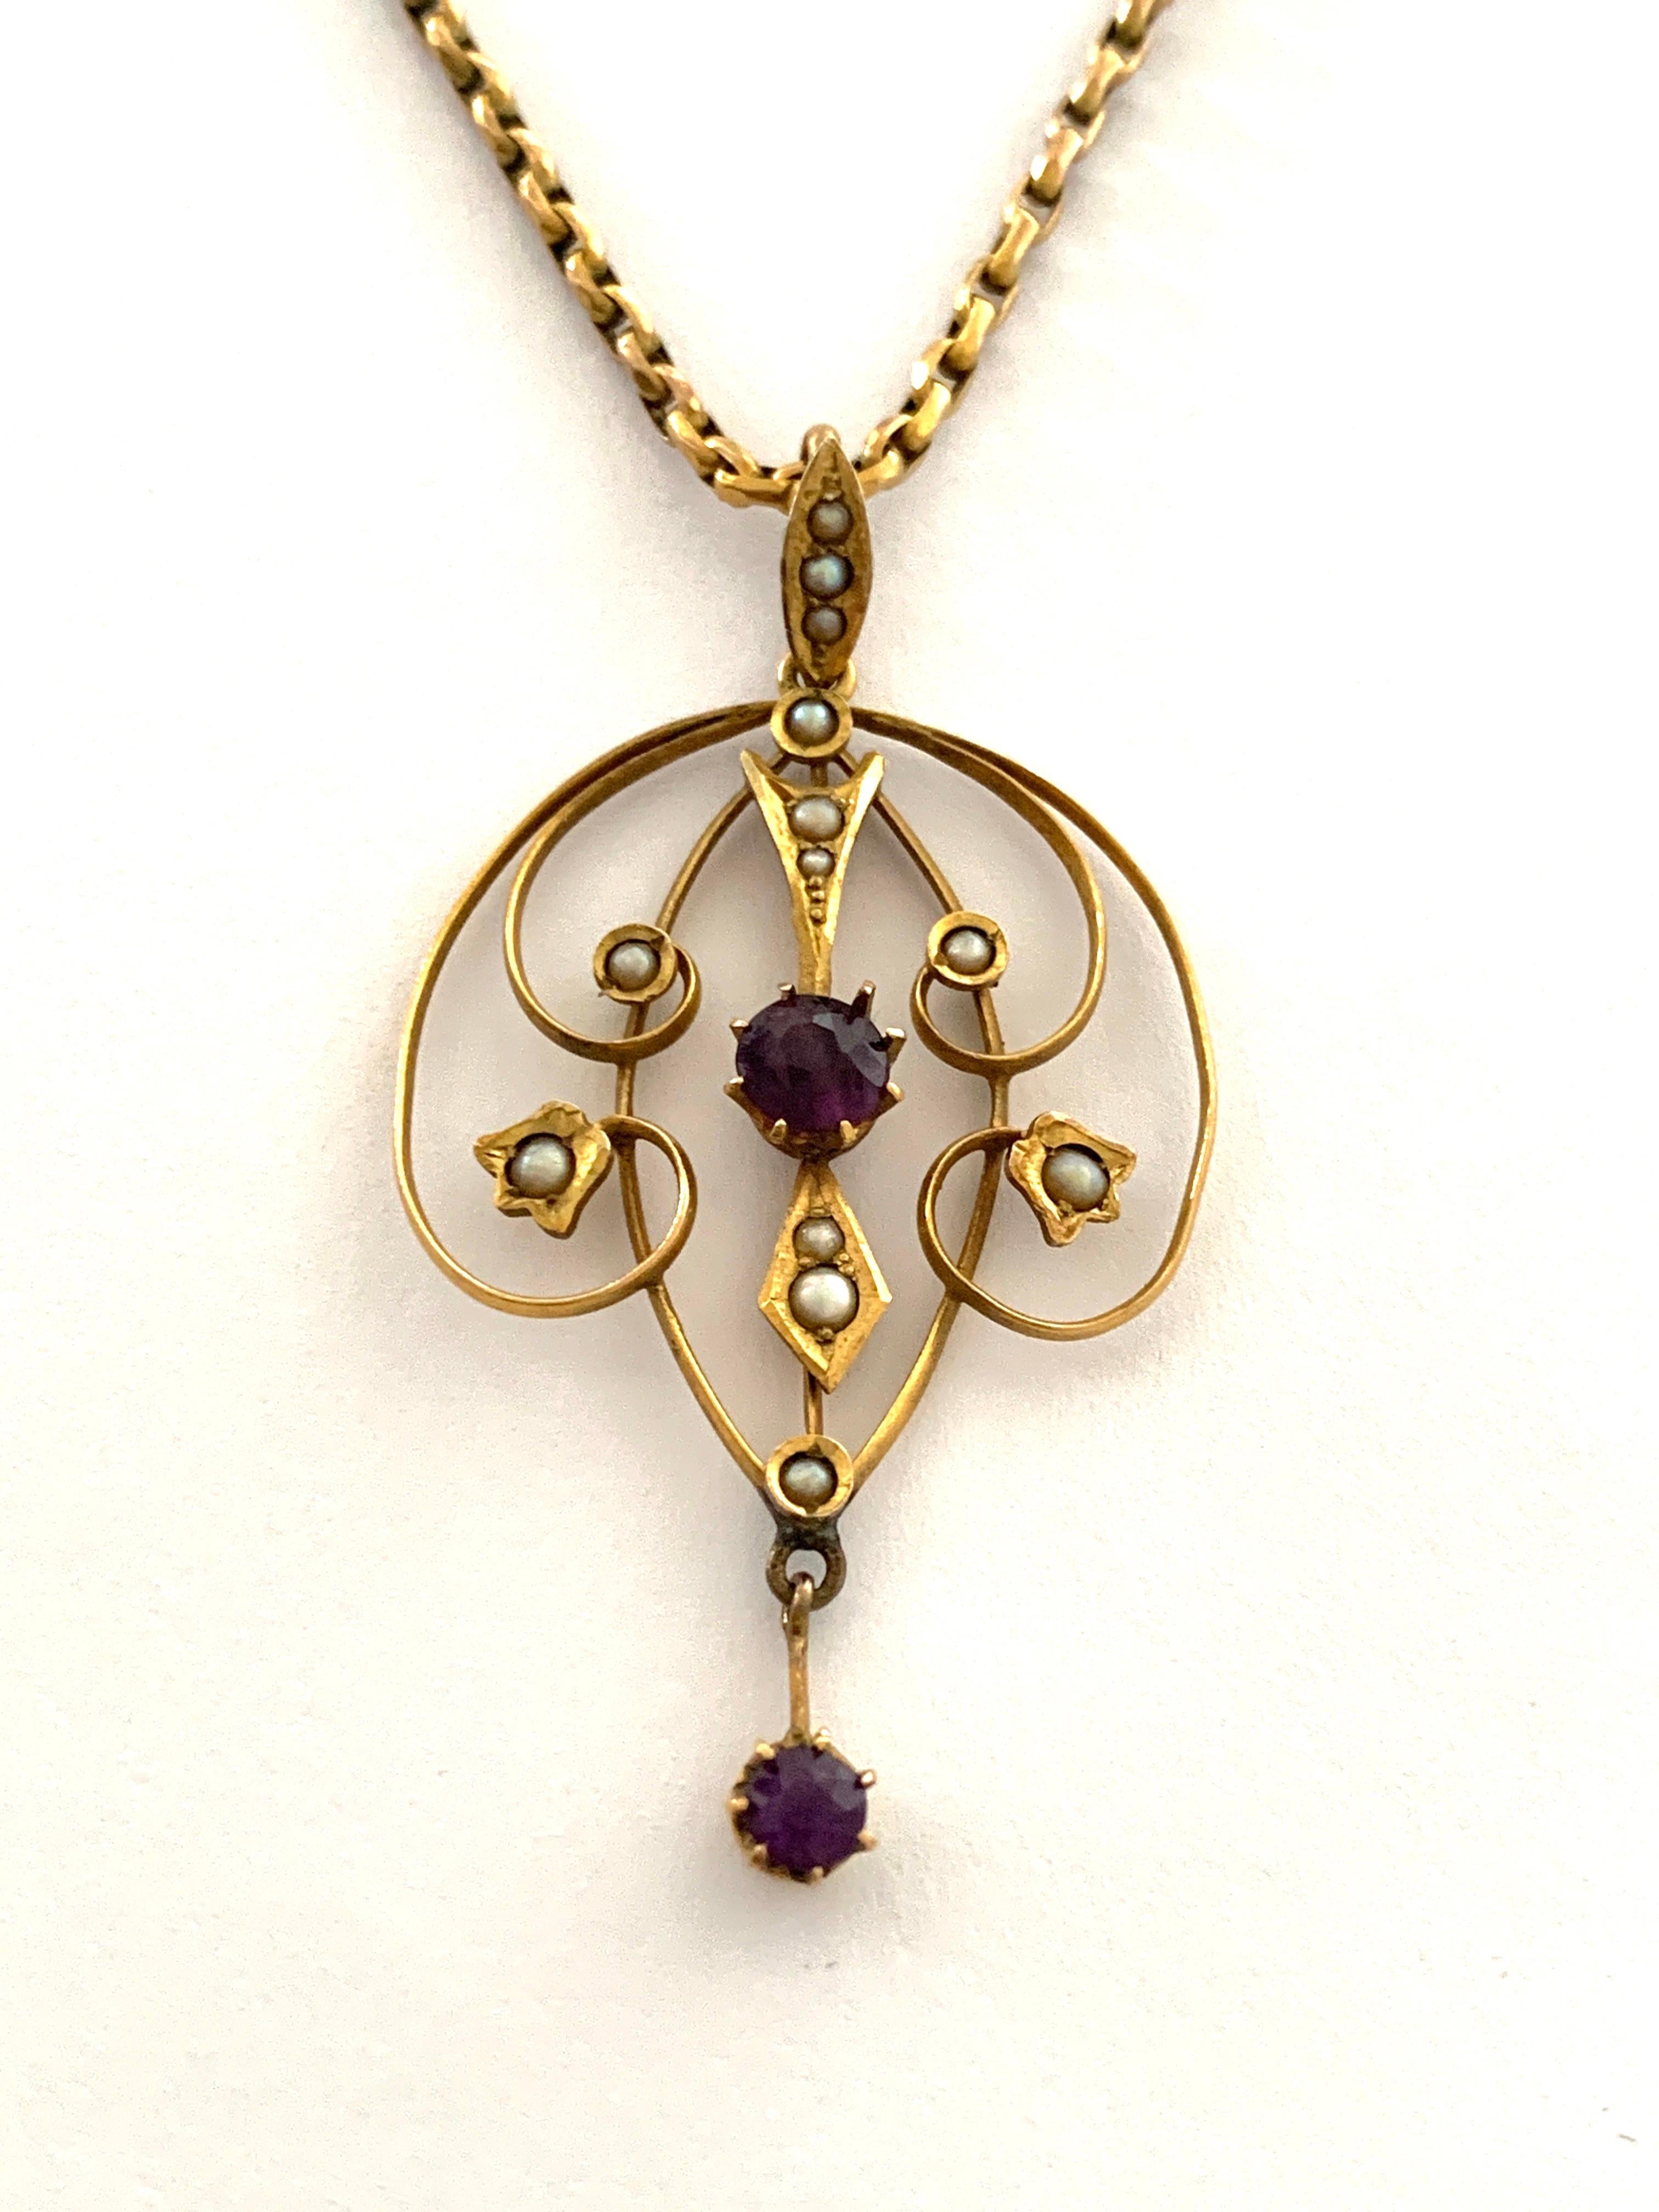 9ct 375 Gold Antique Necklace
Comprising of an amethyst gemstone & cultured Stormy blue seed pearl pendant
on a 9ct gold 17